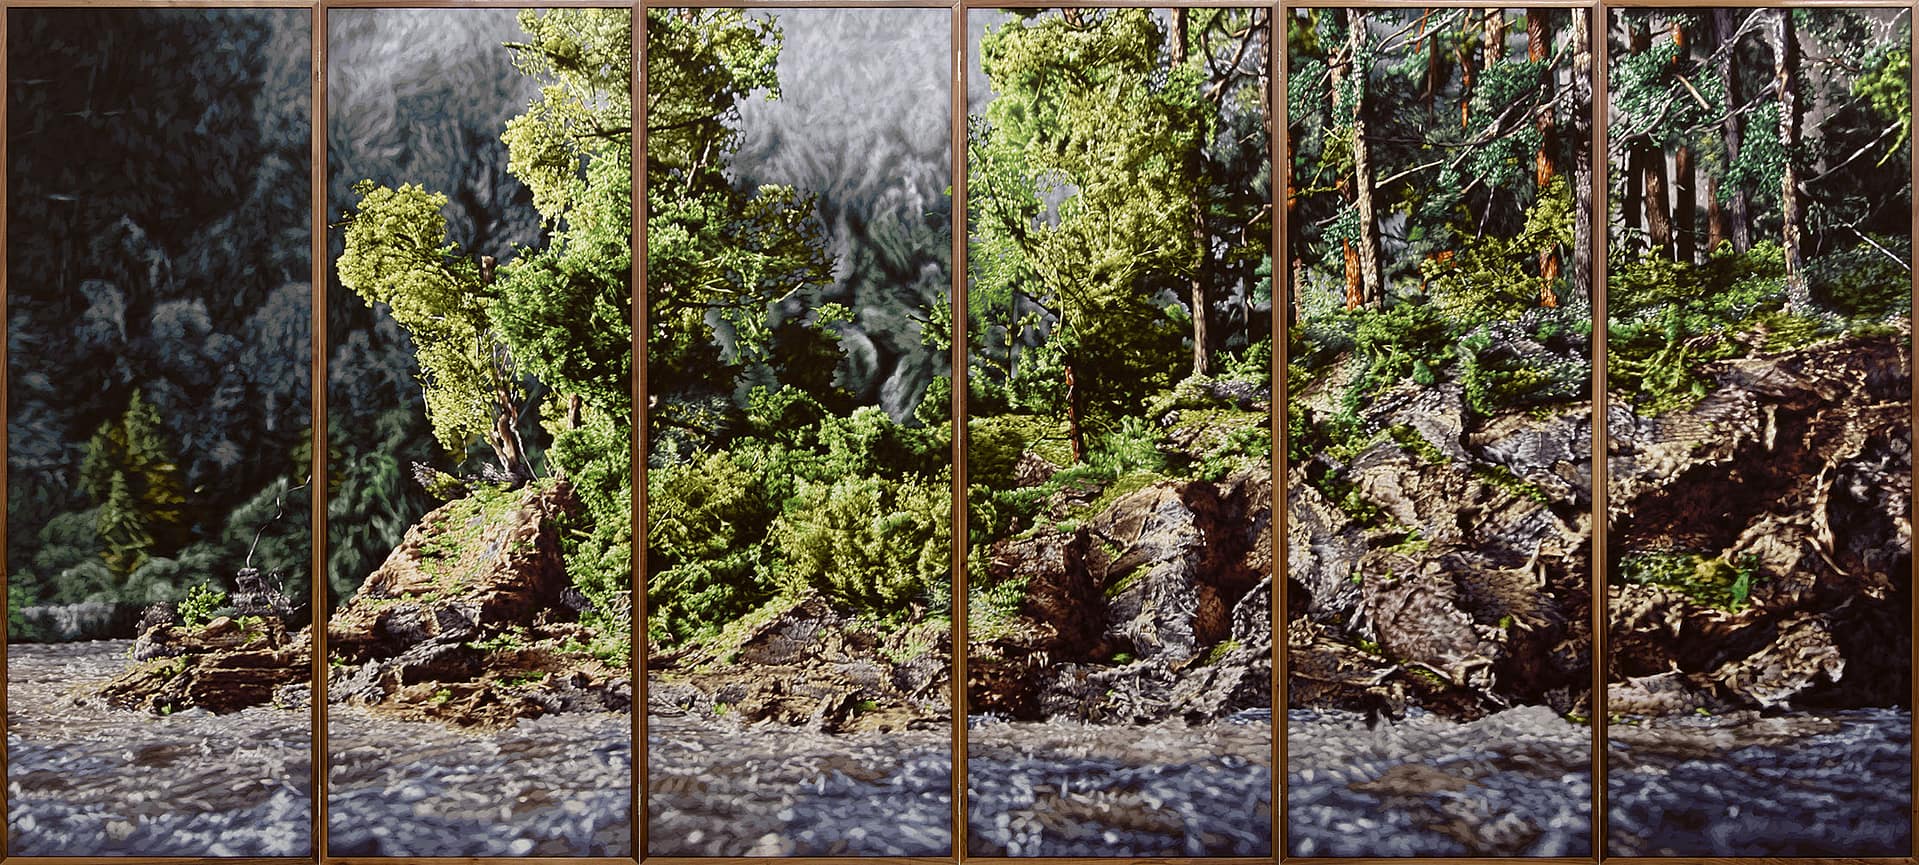 A six panel paravent (byobu) made by Philipp Fröhlich with a tempera painting showing the island of Utøya. First shown at the solo exhibition "HOAP of a tree" at Juana de Aizpuru gallery in Madrid.